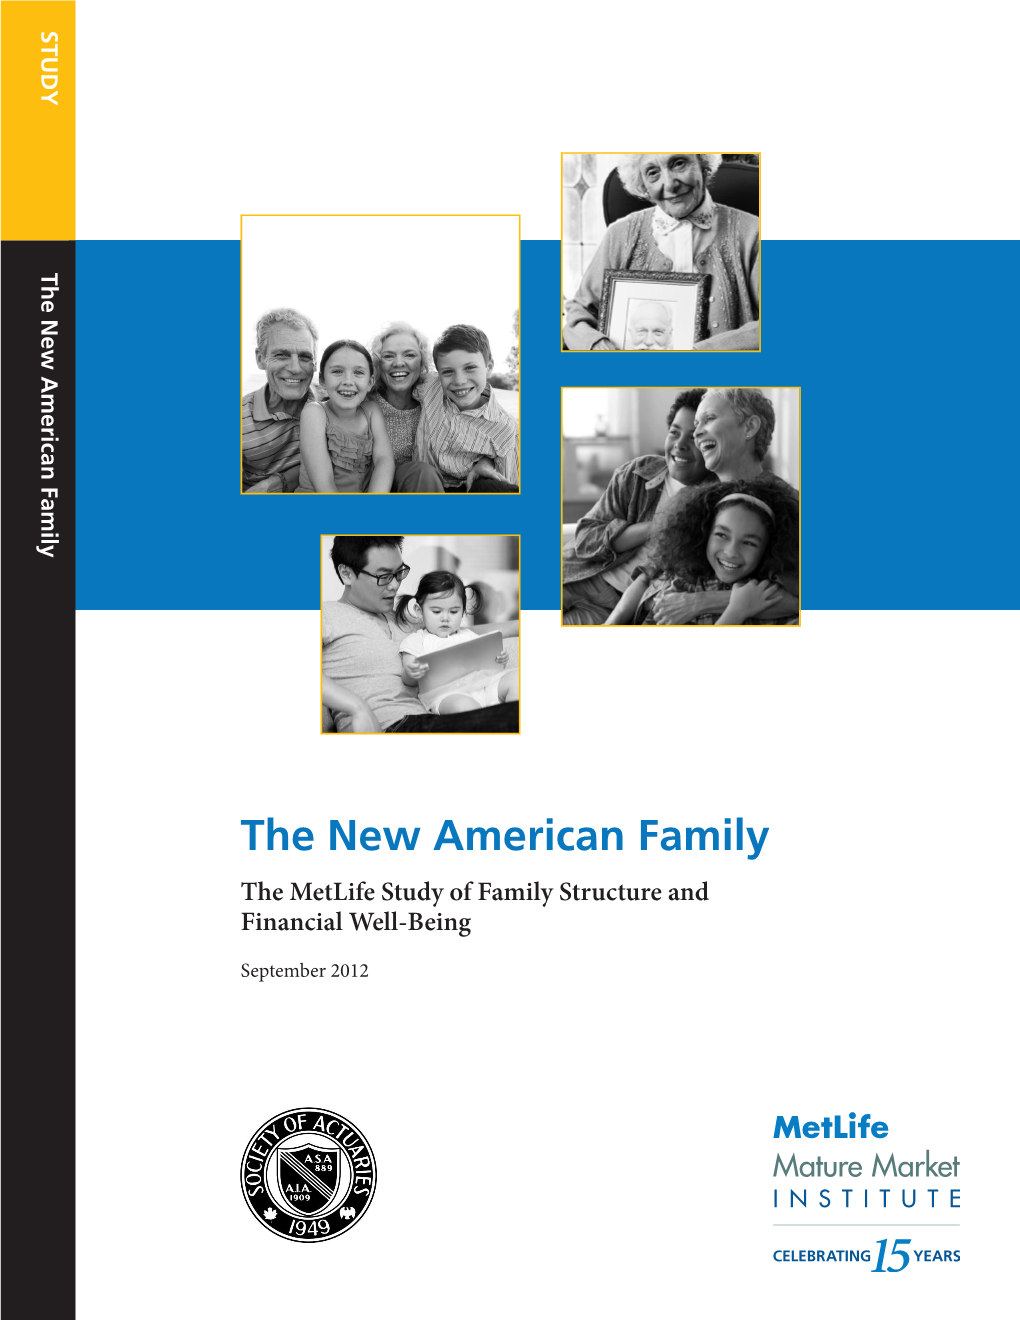 The New American Family the Metlife Study of Family Structure and Financial Well-Being